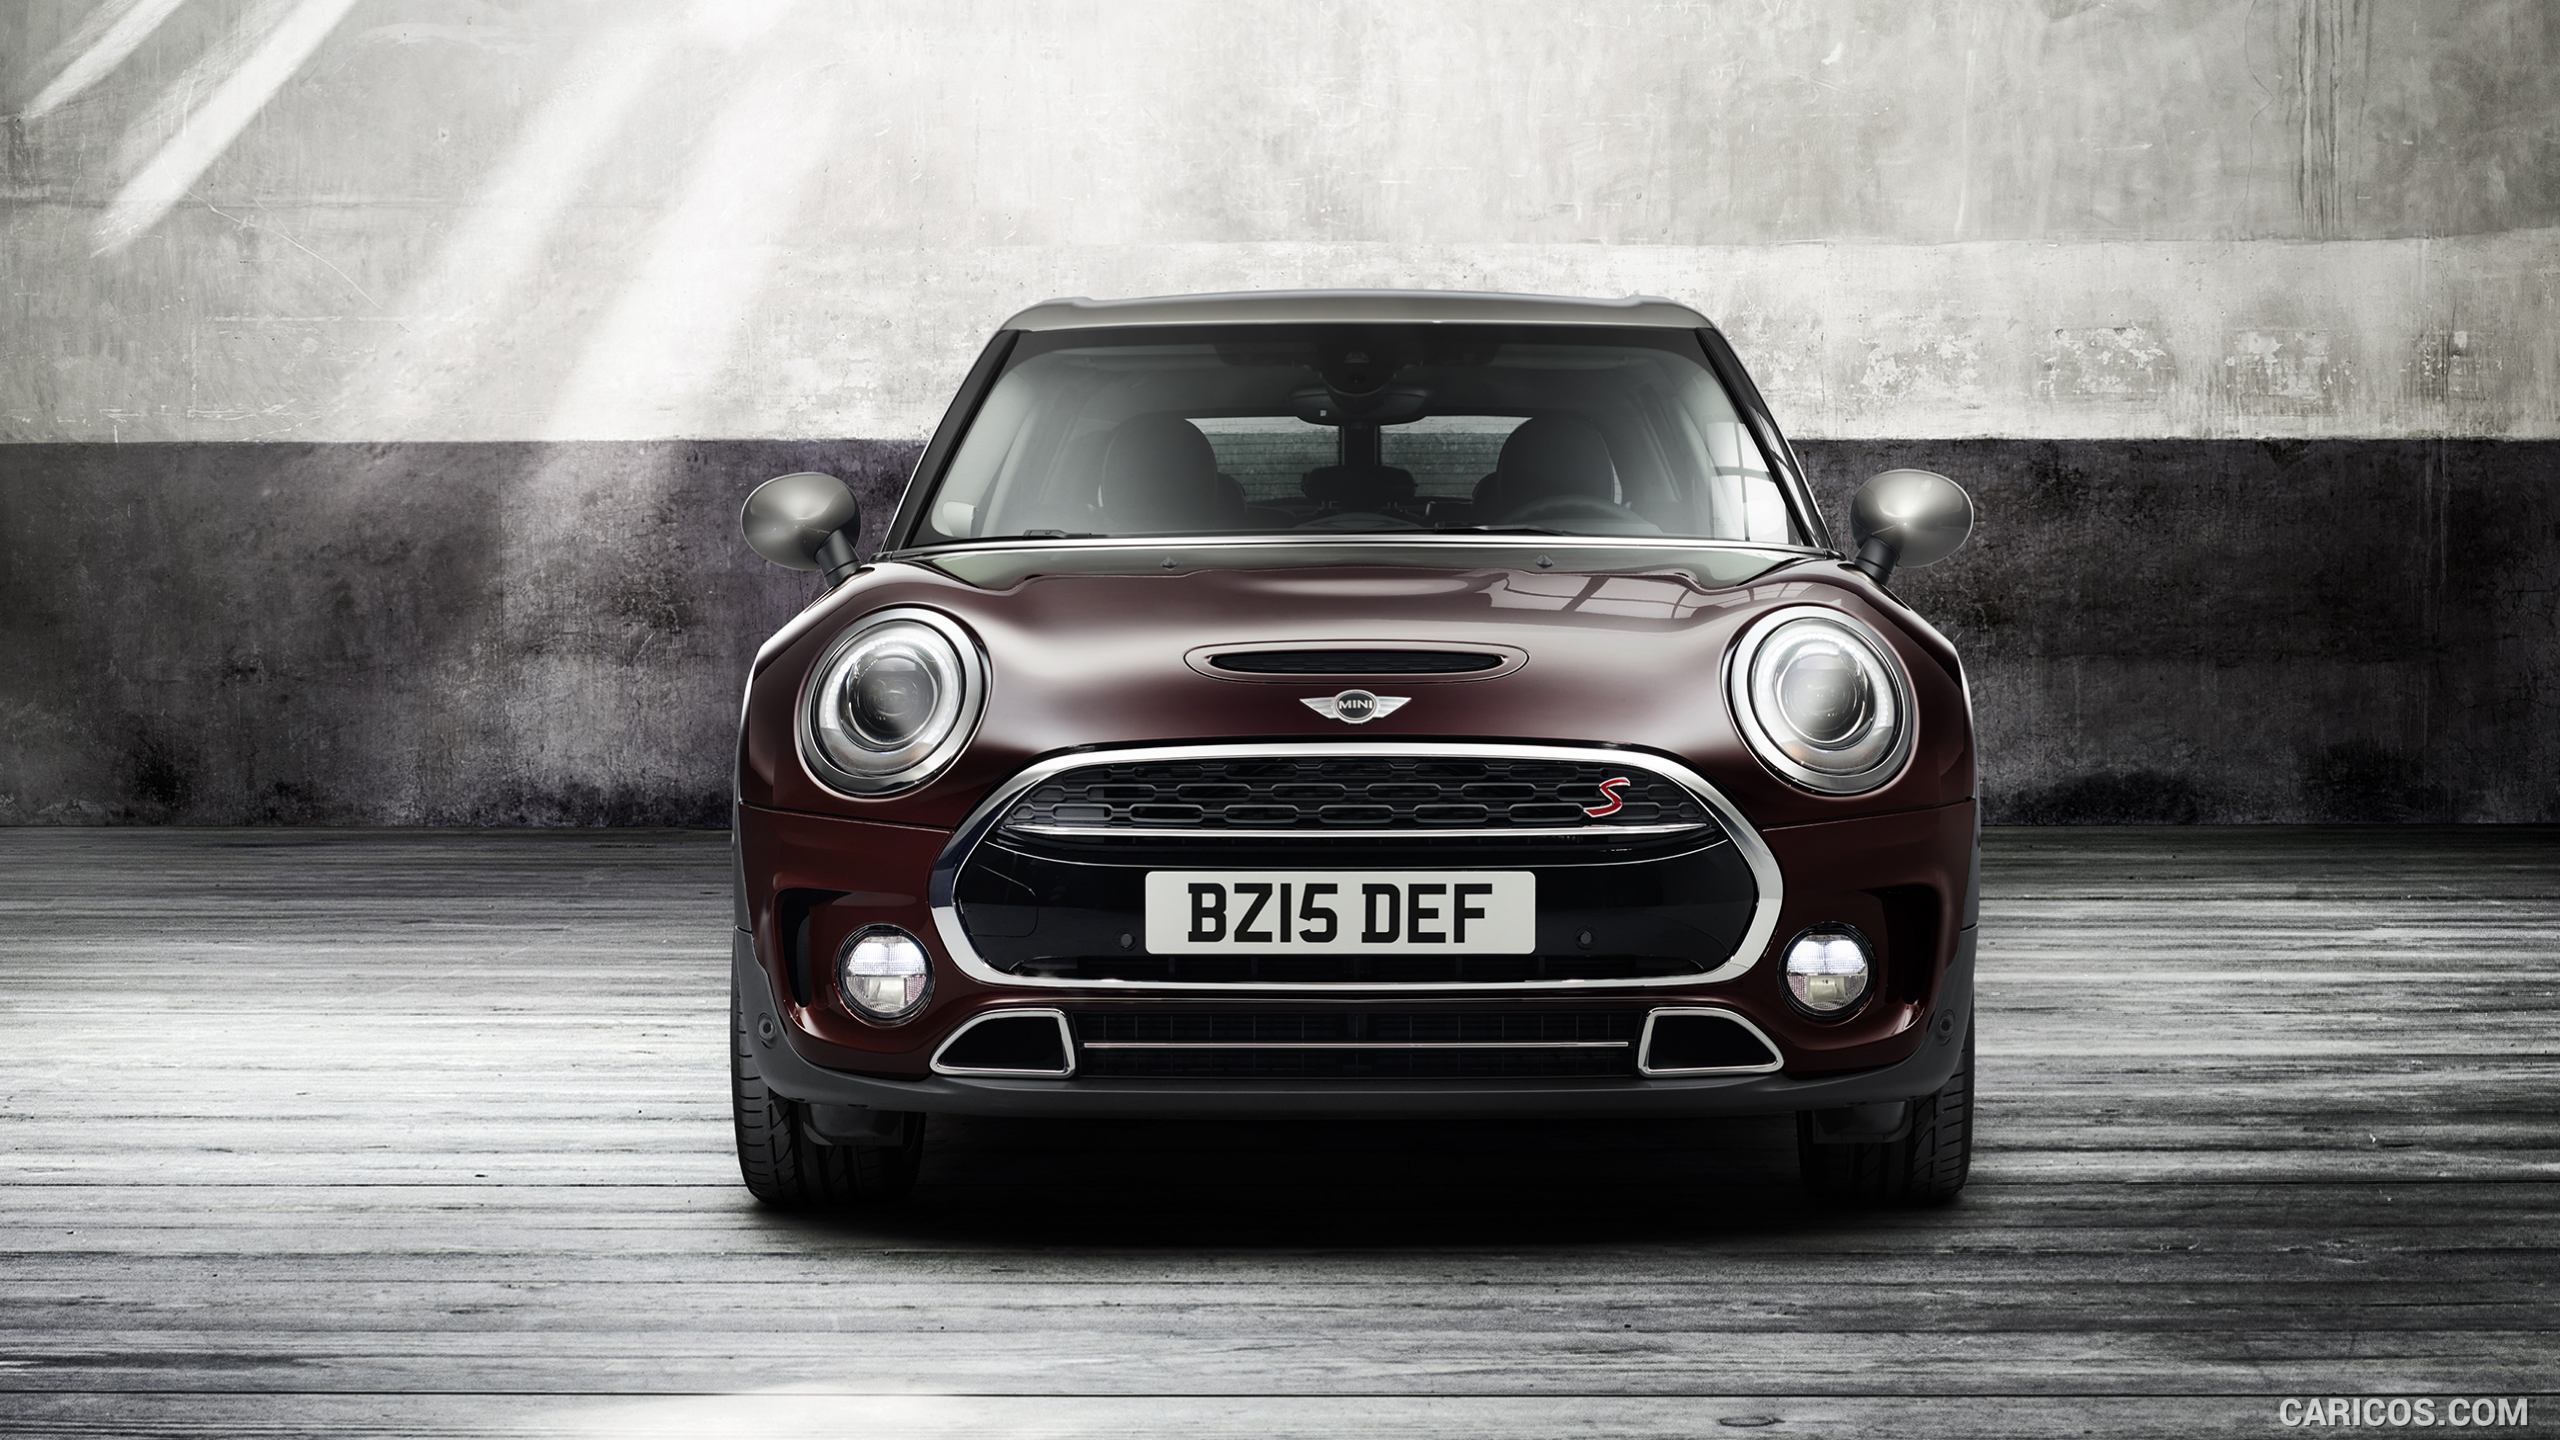 2016 MINI Clubman S - Front, #17 of 380